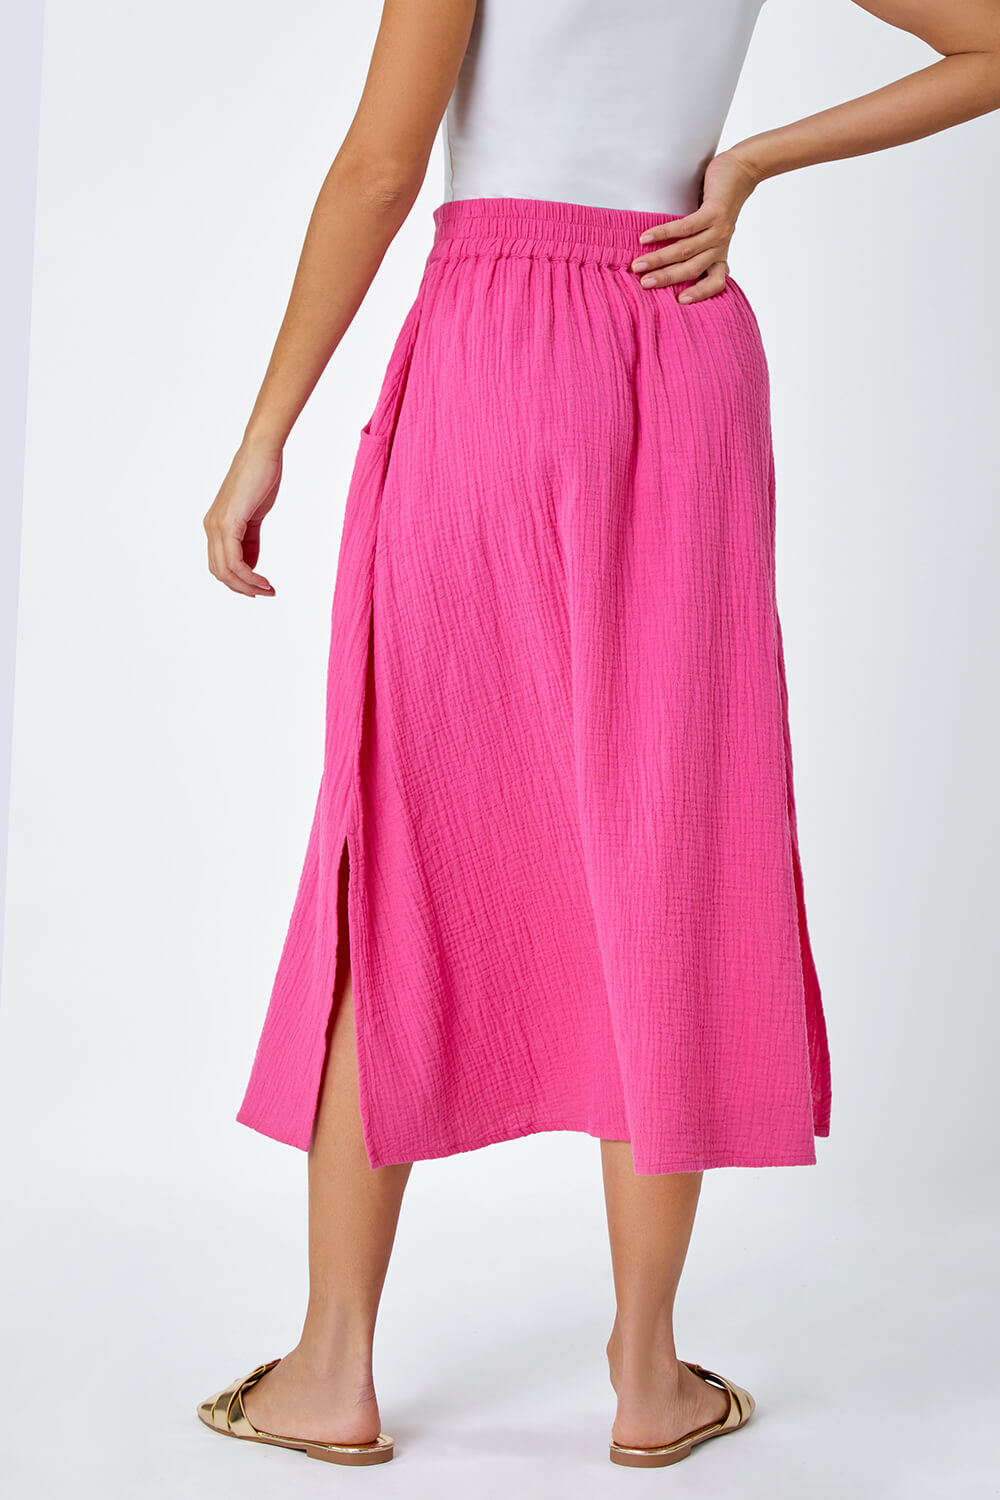 PINK Textured Cotton Maxi Skirt, Image 2 of 4